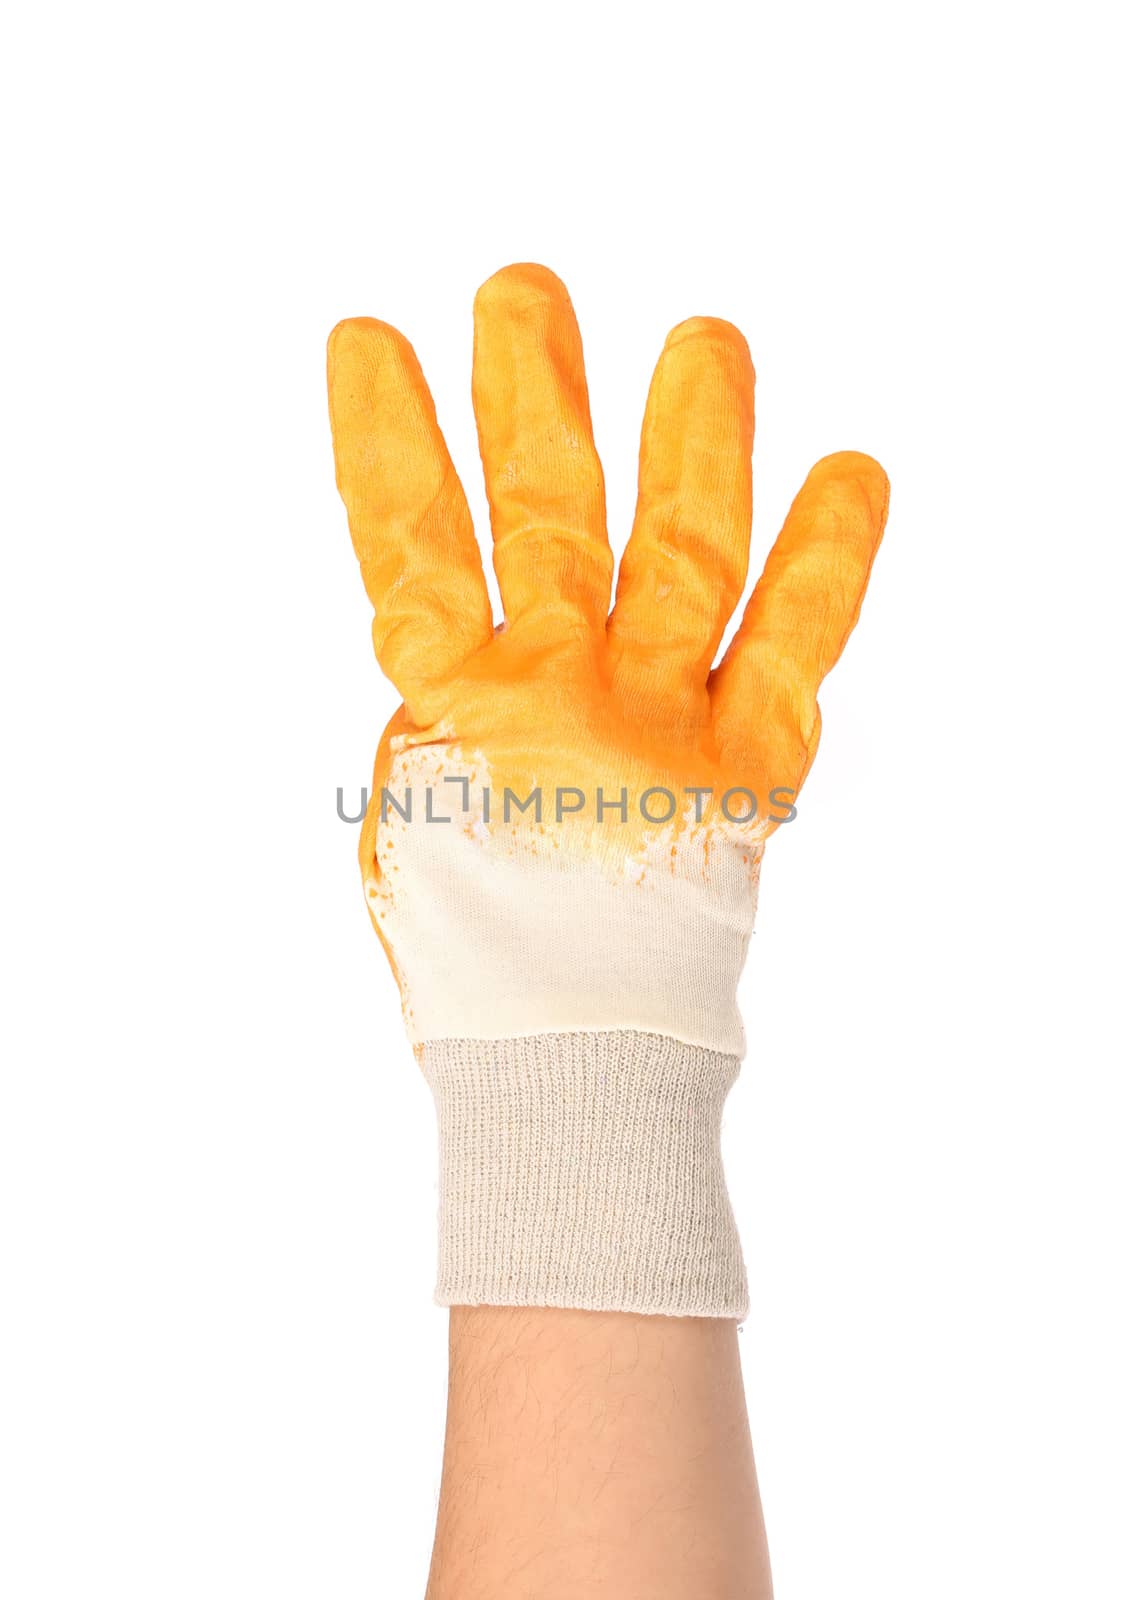 Hand in rubber glove shows four. Isolated on a white background.